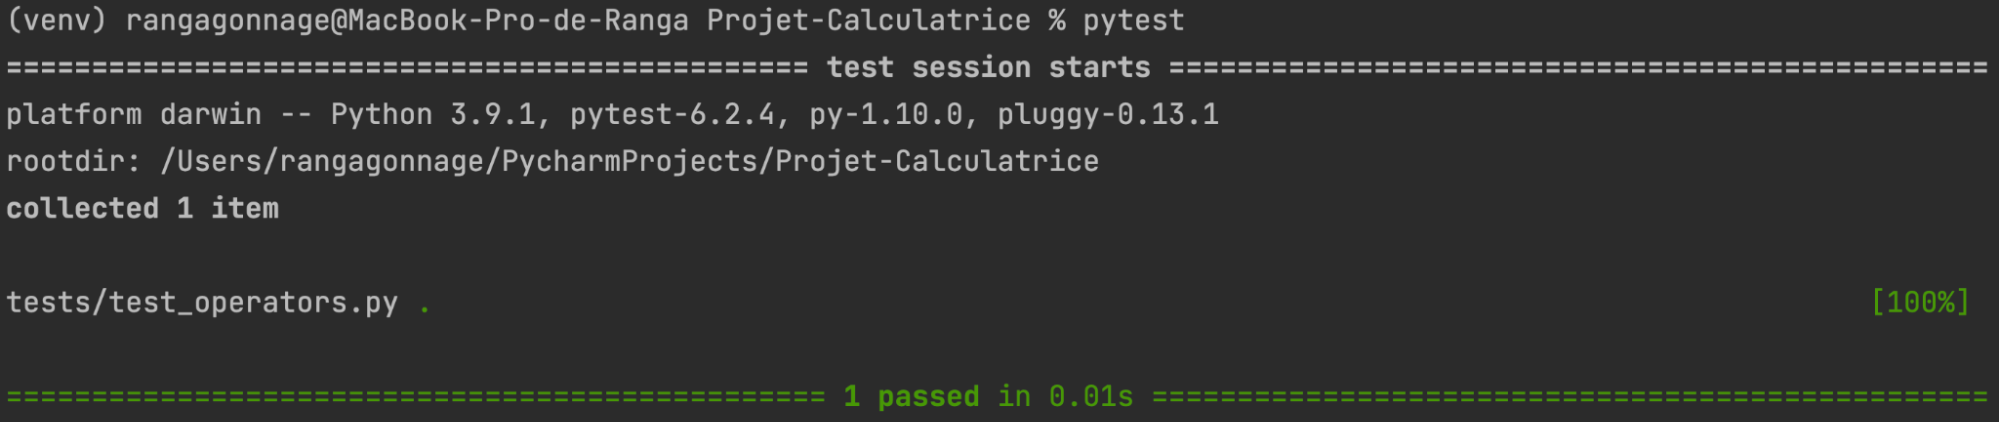 The test is successful after running it using the pytest command.